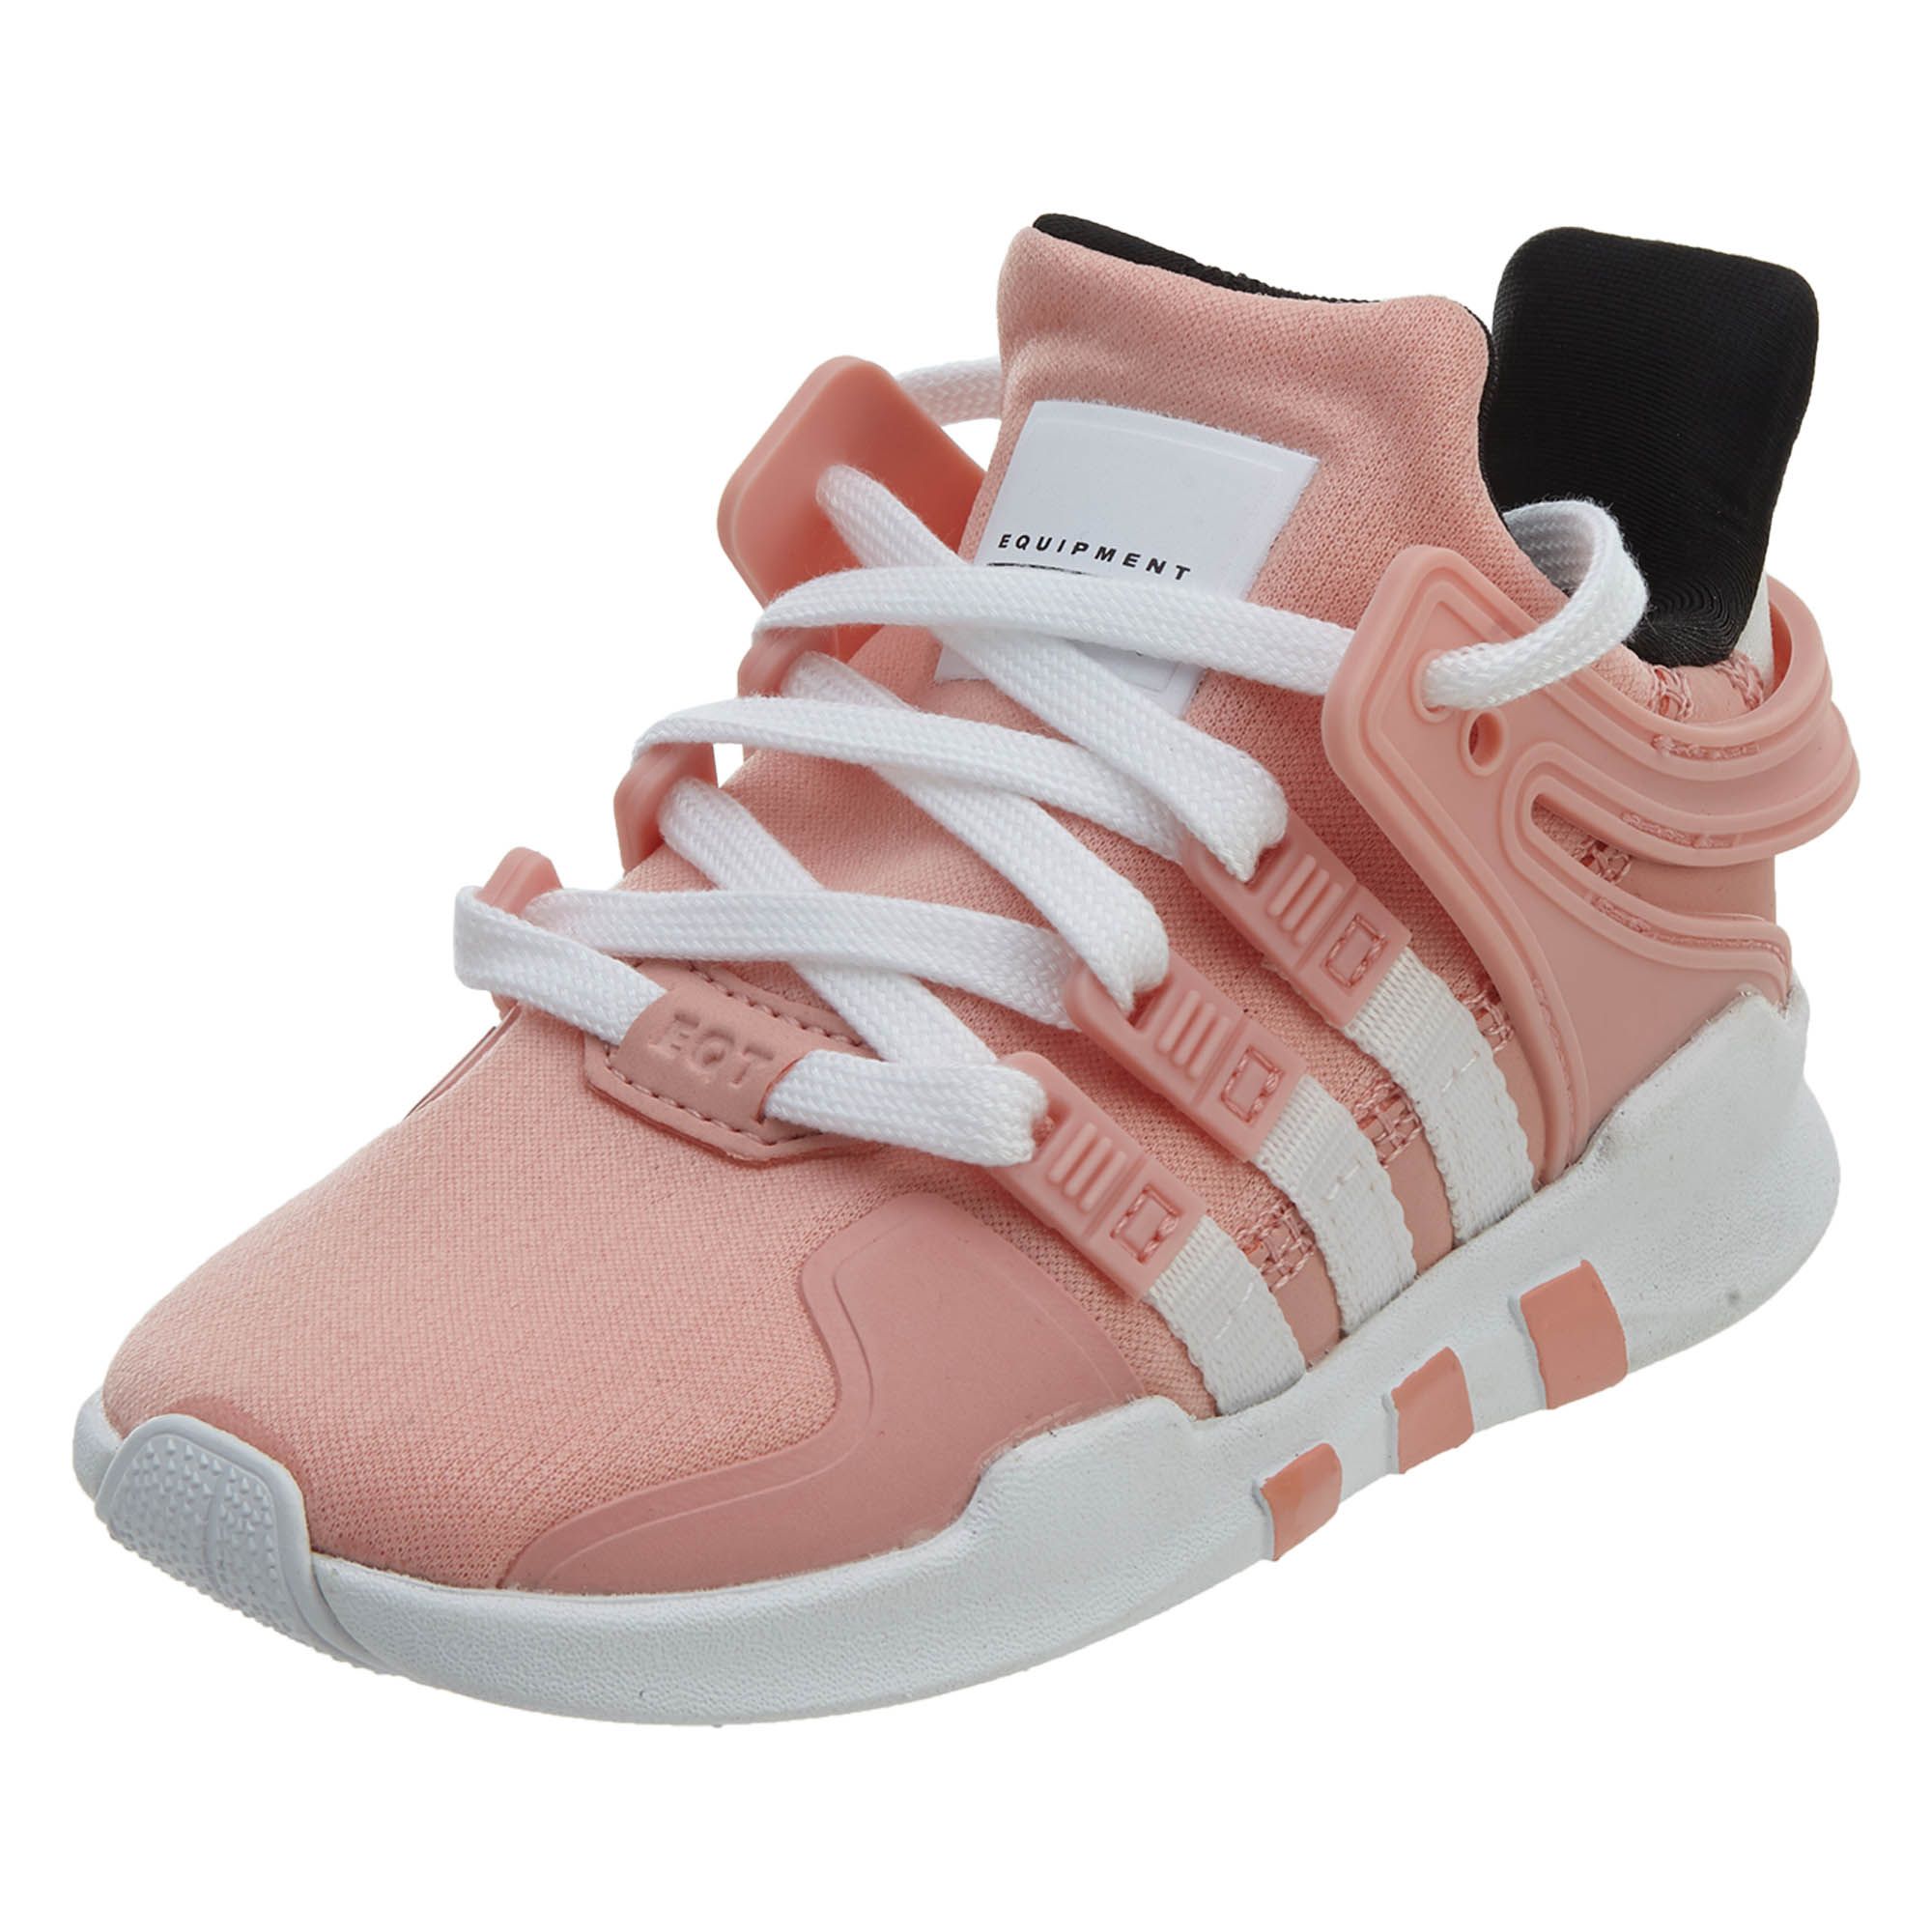 Adidas Eqt Support Adv Toddlers Style 